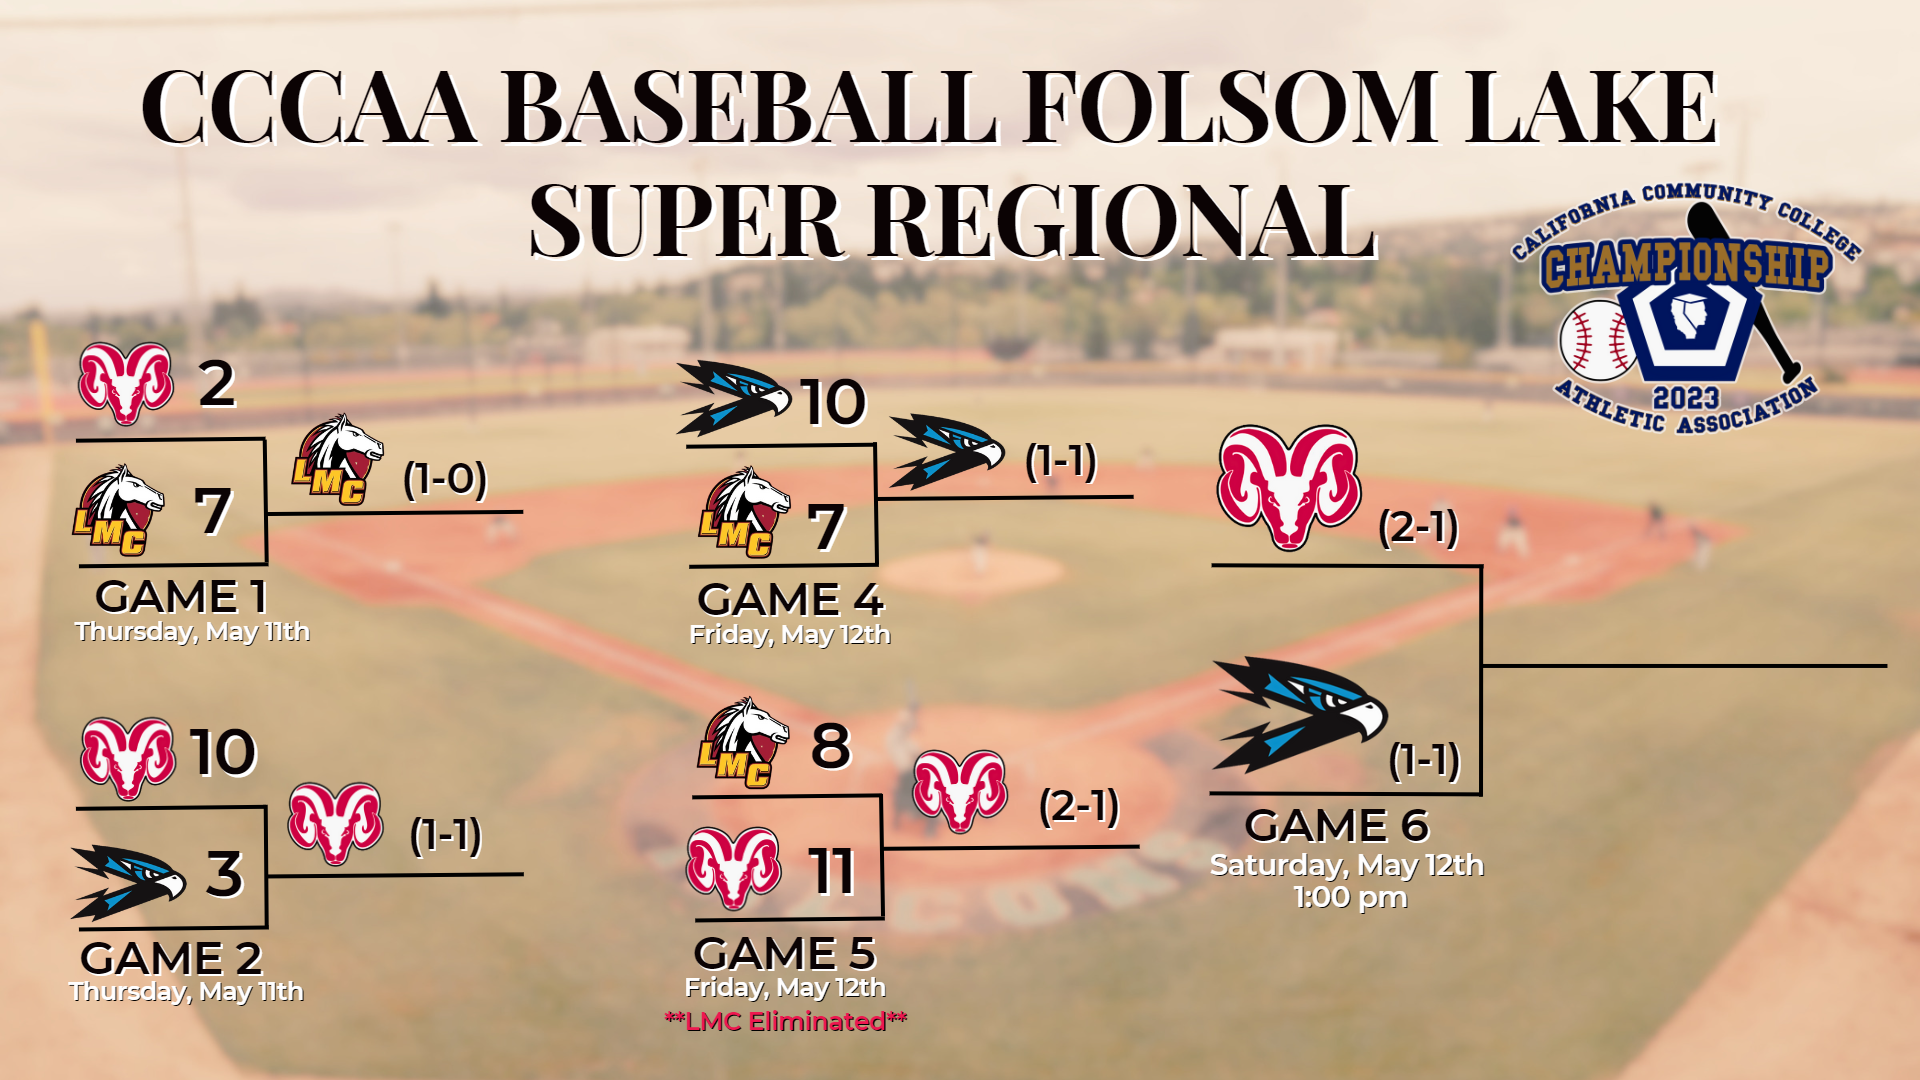 Rams to Face Falcons in Super Regional Championship Game